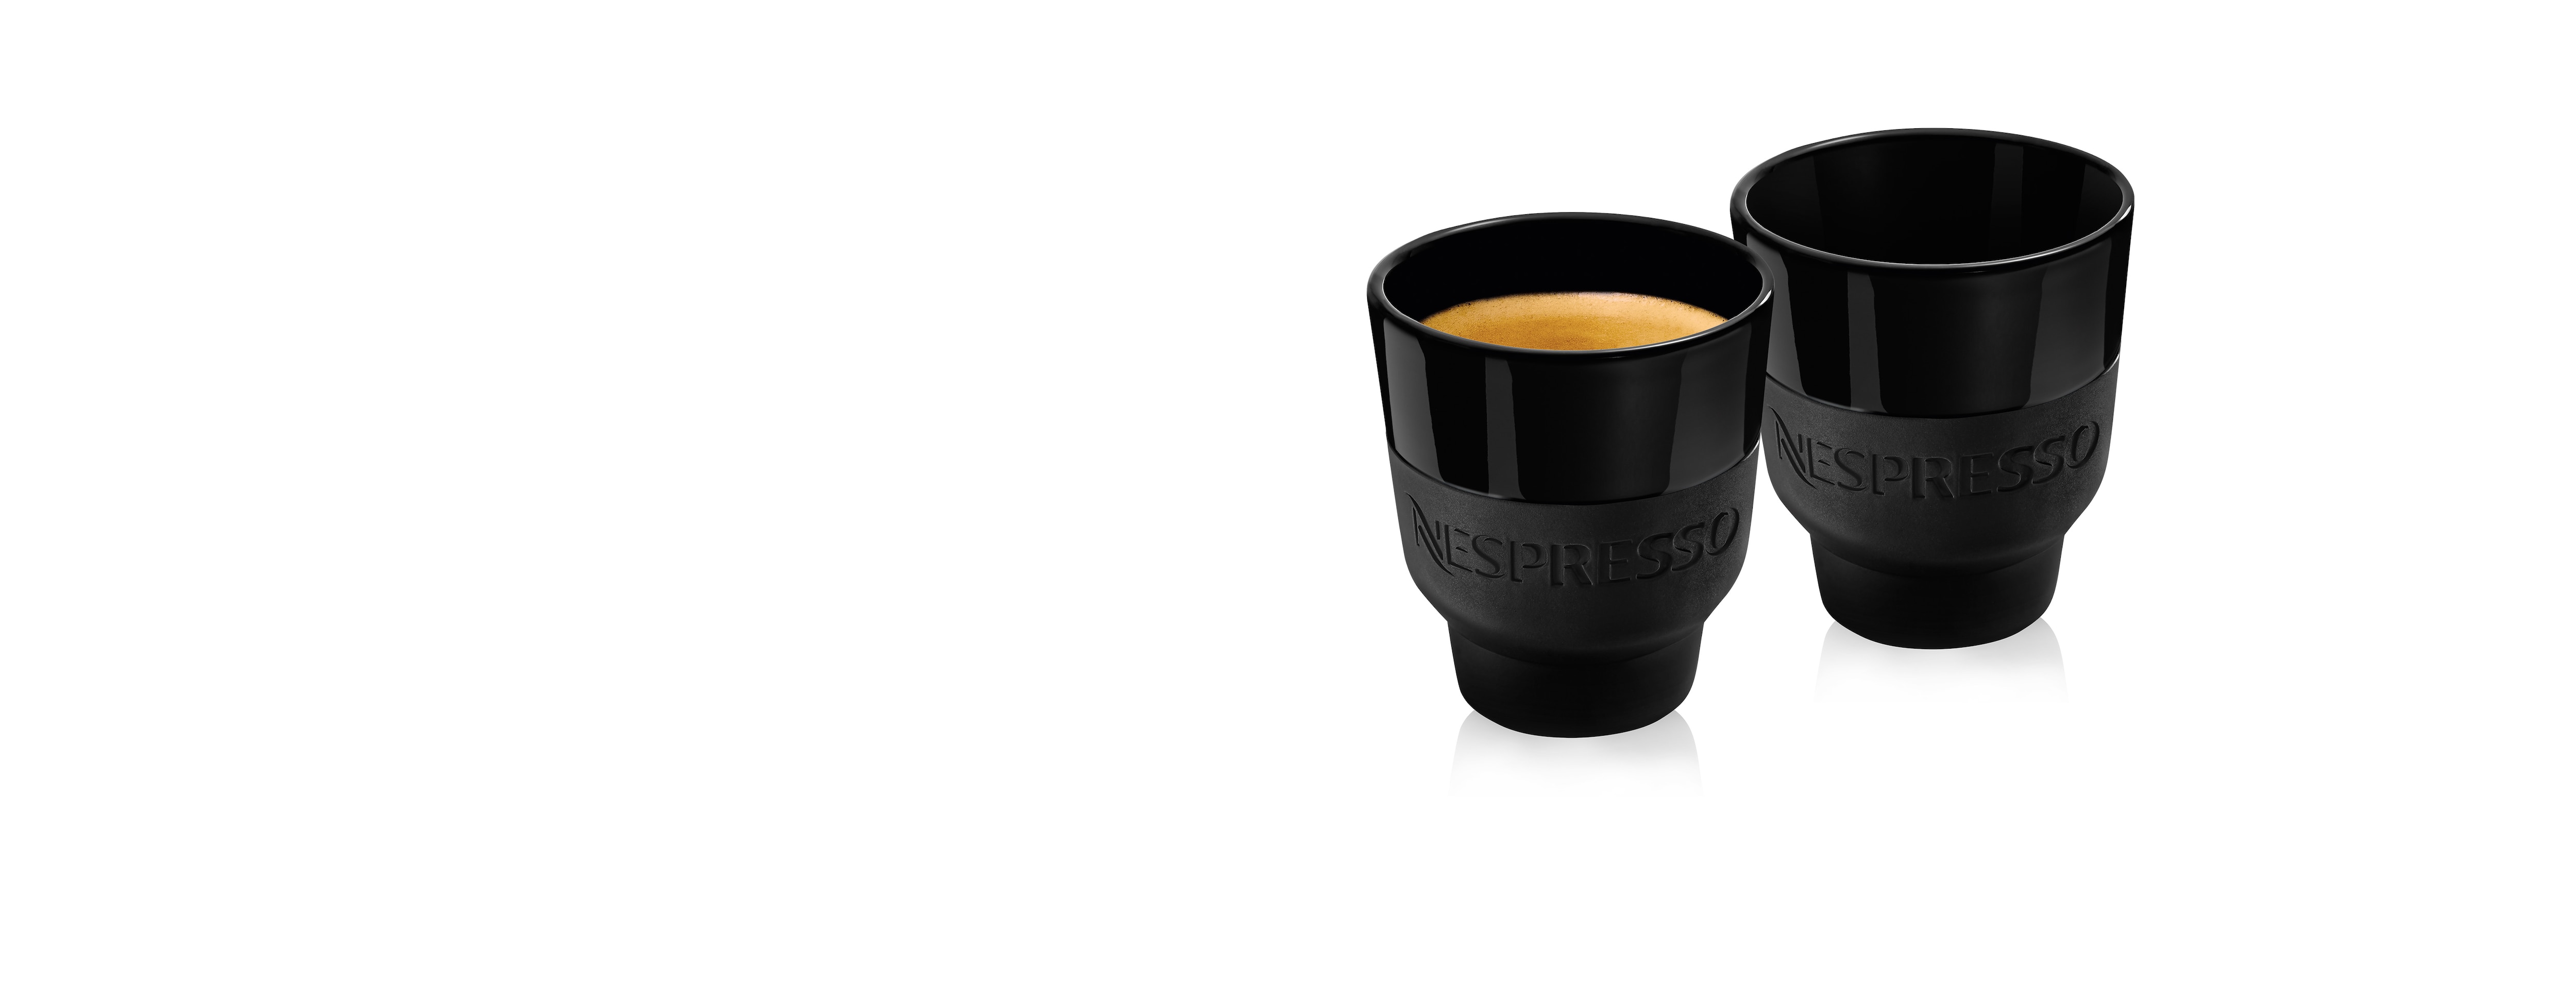 Nespresso Black Lungo Expresso Cups Geckeler Michels Touch Collection Set  of 2